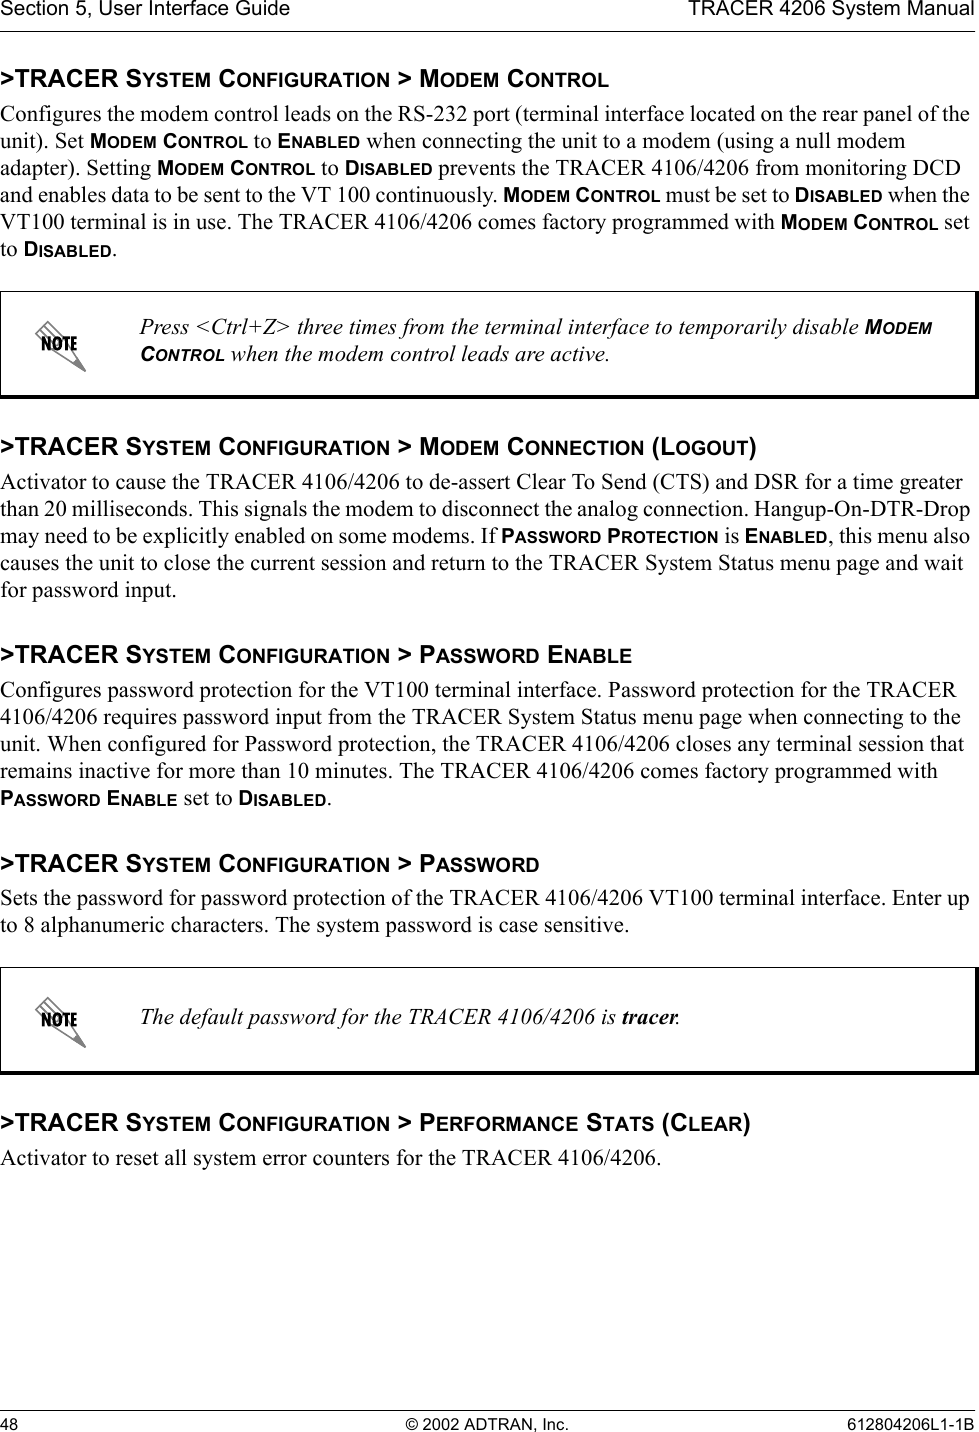 Section 5, User Interface Guide TRACER 4206 System Manual48 © 2002 ADTRAN, Inc. 612804206L1-1B&gt;TRACER SYSTEM CONFIGURATION &gt; MODEM CONTROLConfigures the modem control leads on the RS-232 port (terminal interface located on the rear panel of the unit). Set MODEM CONTROL to ENABLED when connecting the unit to a modem (using a null modem adapter). Setting MODEM CONTROL to DISABLED prevents the TRACER 4106/4206 from monitoring DCD and enables data to be sent to the VT 100 continuously. MODEM CONTROL must be set to DISABLED when the VT100 terminal is in use. The TRACER 4106/4206 comes factory programmed with MODEM CONTROL set to DISABLED.&gt;TRACER SYSTEM CONFIGURATION &gt; MODEM CONNECTION (LOGOUT)Activator to cause the TRACER 4106/4206 to de-assert Clear To Send (CTS) and DSR for a time greater than 20 milliseconds. This signals the modem to disconnect the analog connection. Hangup-On-DTR-Drop may need to be explicitly enabled on some modems. If PASSWORD PROTECTION is ENABLED, this menu also causes the unit to close the current session and return to the TRACER System Status menu page and wait for password input.&gt;TRACER SYSTEM CONFIGURATION &gt; PASSWORD ENABLEConfigures password protection for the VT100 terminal interface. Password protection for the TRACER 4106/4206 requires password input from the TRACER System Status menu page when connecting to the unit. When configured for Password protection, the TRACER 4106/4206 closes any terminal session that remains inactive for more than 10 minutes. The TRACER 4106/4206 comes factory programmed with PASSWORD ENABLE set to DISABLED. &gt;TRACER SYSTEM CONFIGURATION &gt; PASSWORDSets the password for password protection of the TRACER 4106/4206 VT100 terminal interface. Enter up to 8 alphanumeric characters. The system password is case sensitive.&gt;TRACER SYSTEM CONFIGURATION &gt; PERFORMANCE STATS (CLEAR)Activator to reset all system error counters for the TRACER 4106/4206.Press &lt;Ctrl+Z&gt; three times from the terminal interface to temporarily disable MODEM CONTROL when the modem control leads are active.The default password for the TRACER 4106/4206 is tracer.